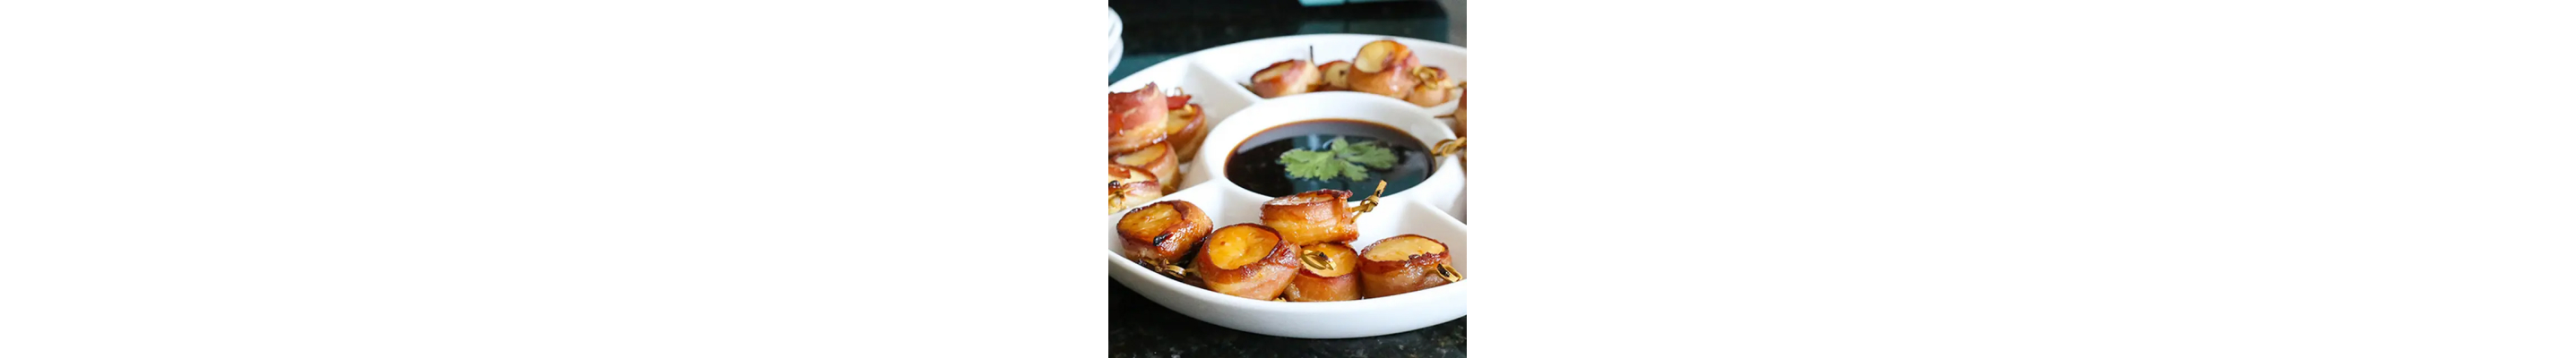 Bacon-wrapped scallops on a platter with sauce in the middle